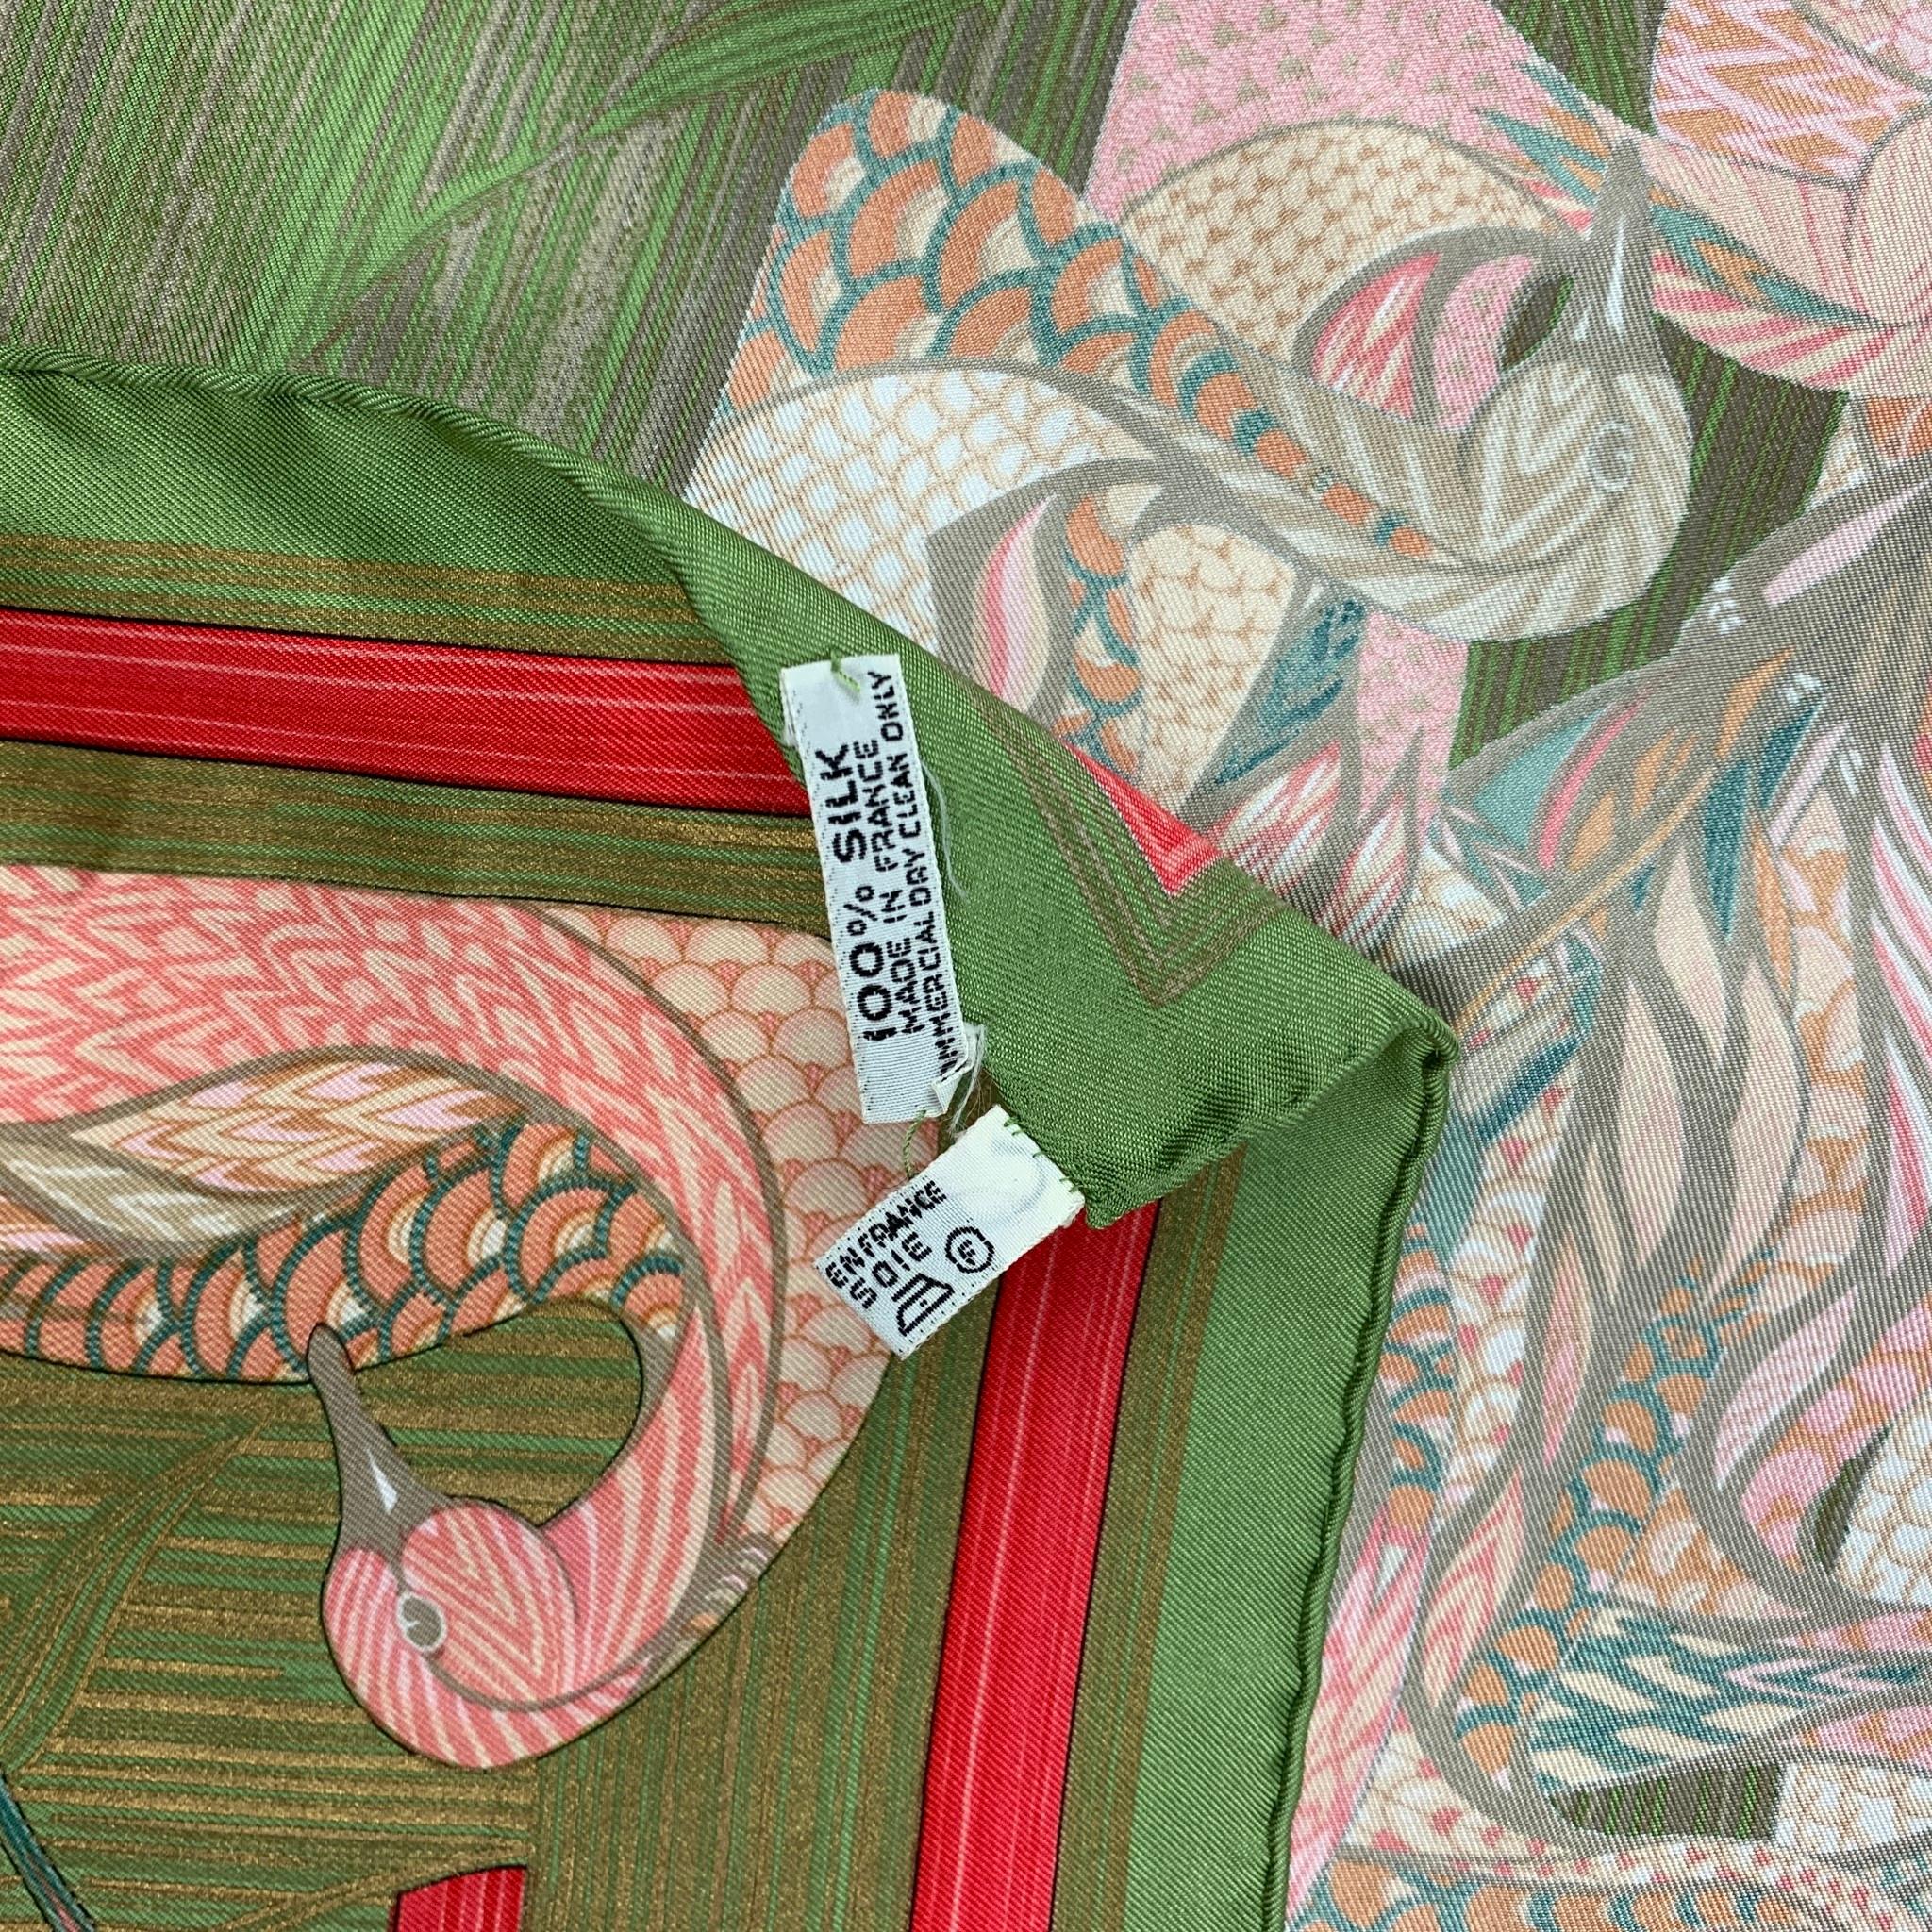 HERMES LA MARE AUX CANARDS Green Pink Print Silk Scarf 2